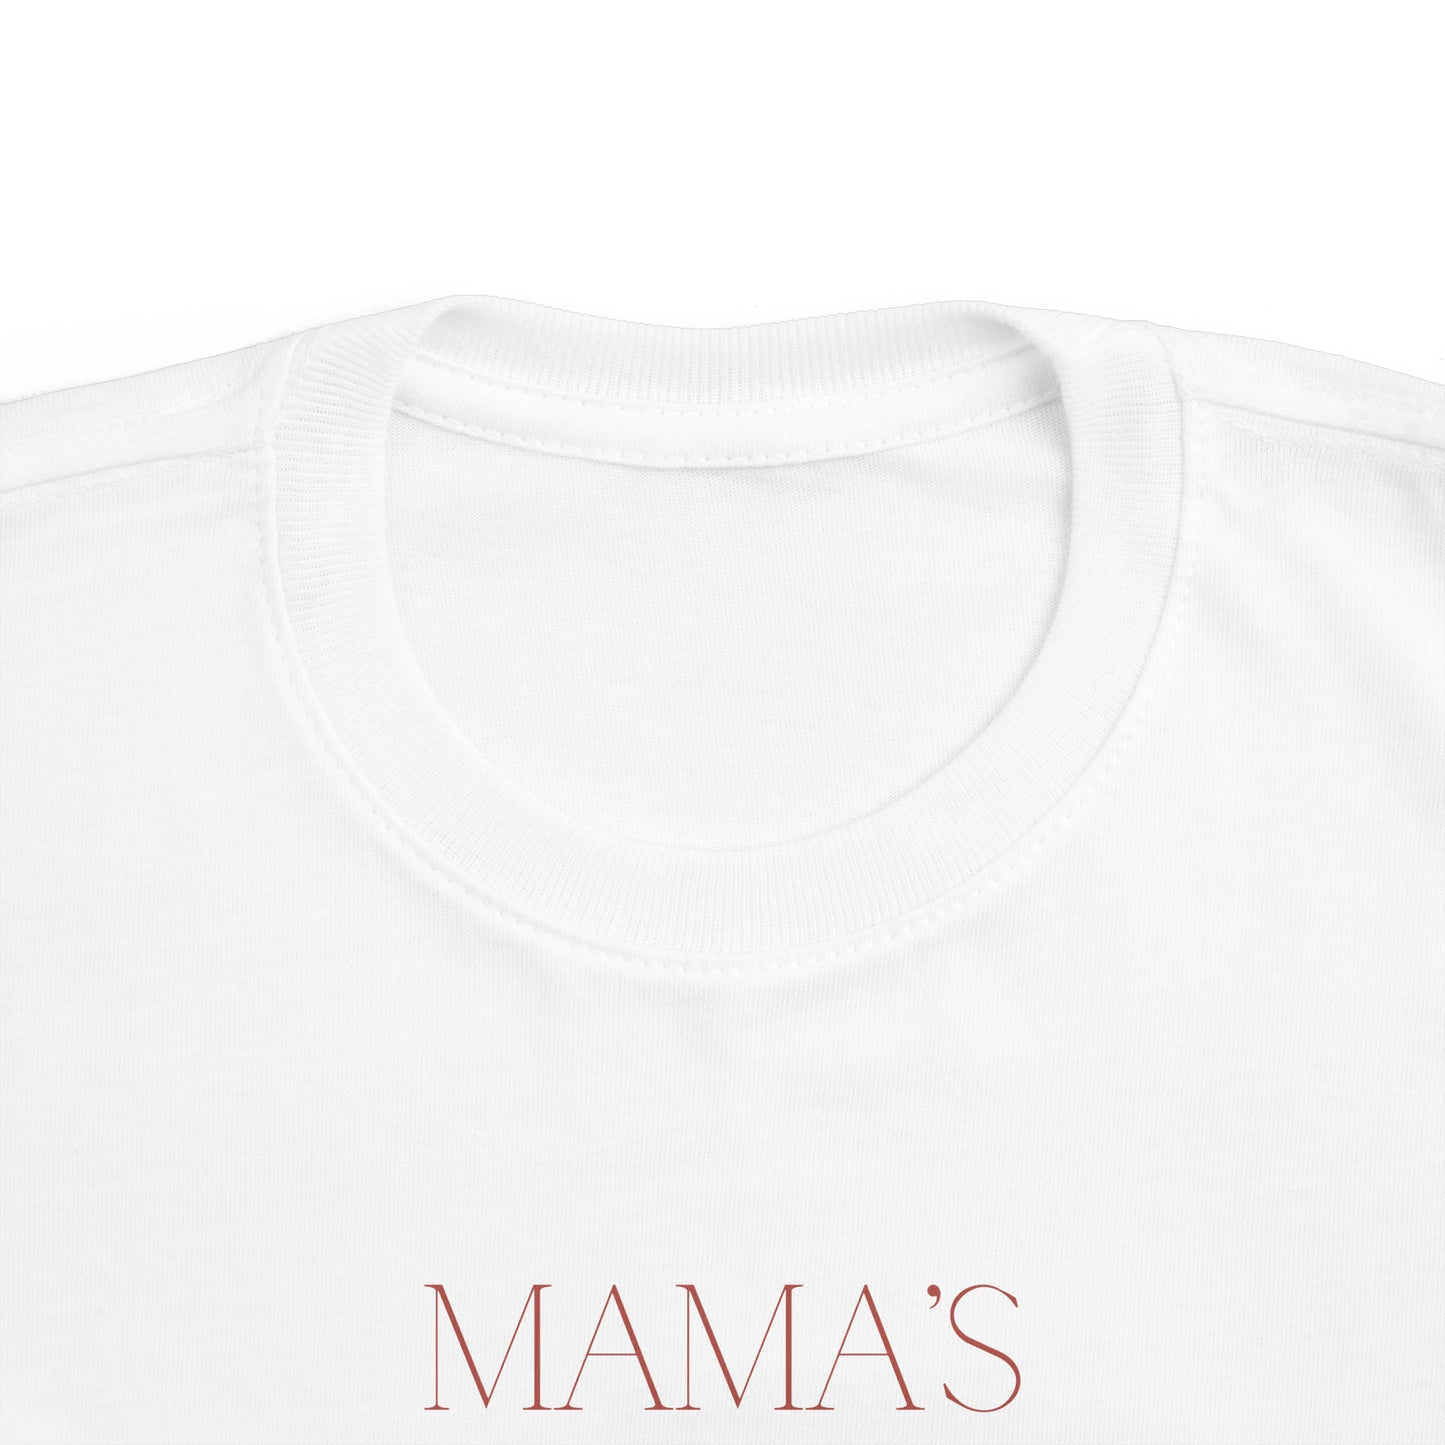 MAMA'S coffee date unisex print short-sleeve t-shirt for toddlers